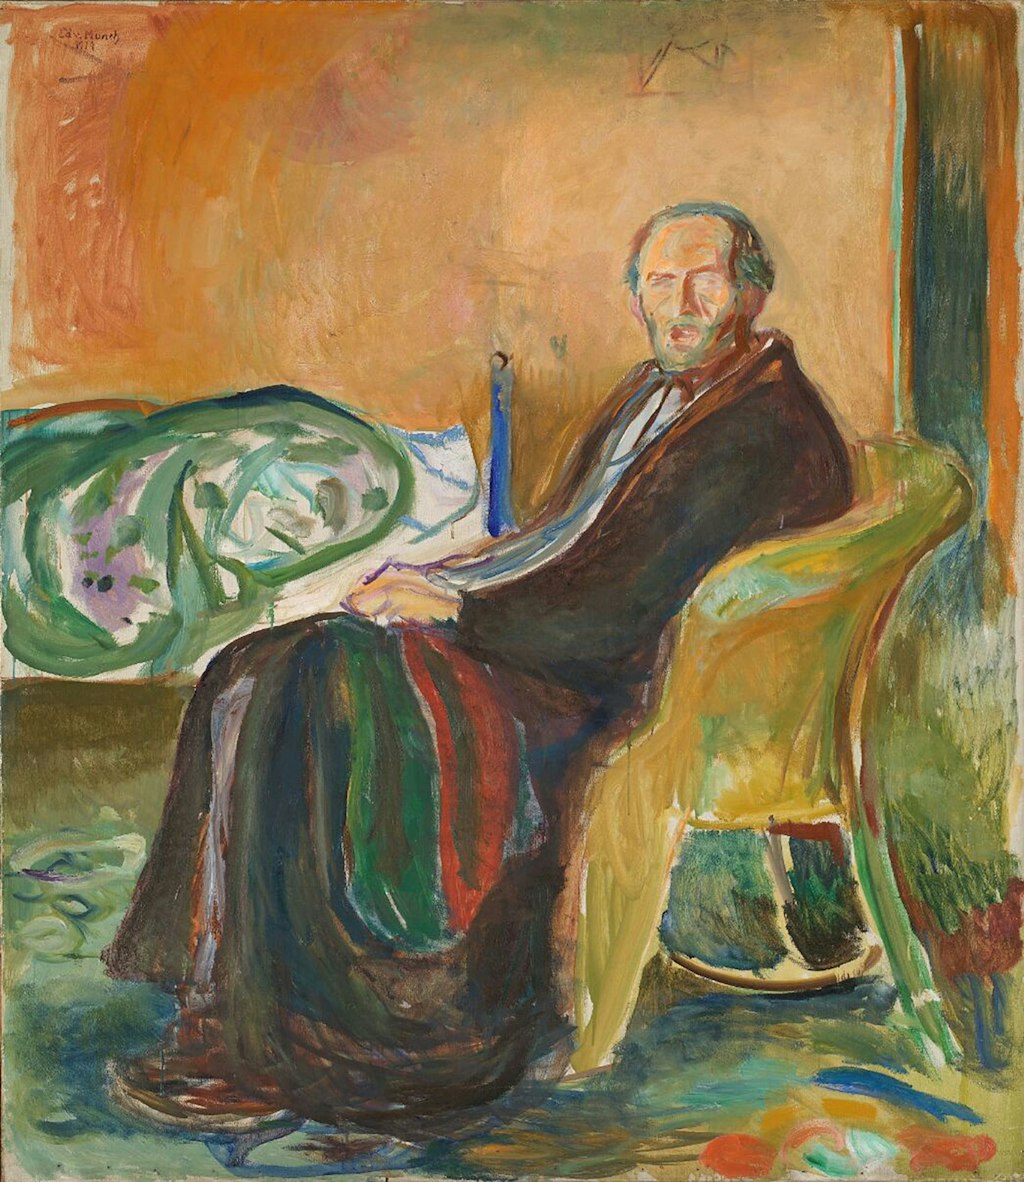 A colourful painting of a person sitting in a chair. They are wearing a long robe and have a blanket on their lap.